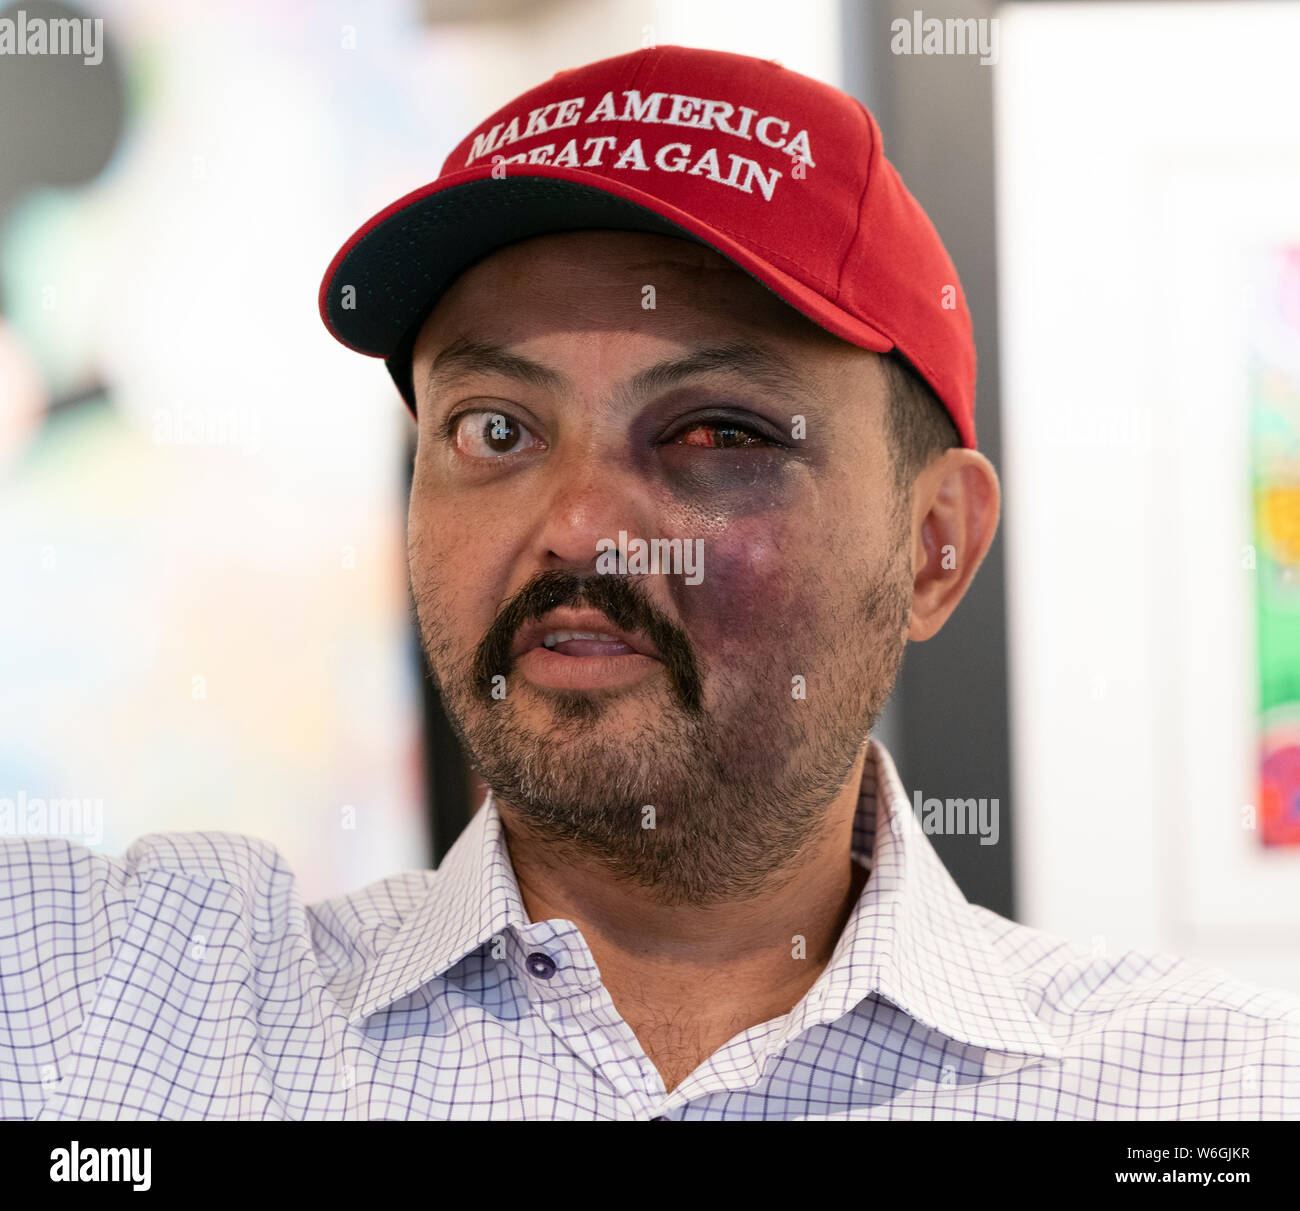 New York, NY - August 1, 2019: Jahangir Turan speaks at press conference after being beaten for wearing MAGA hat on the street of New York City by 15 teenagers at David Parker Gallery Stock Photo